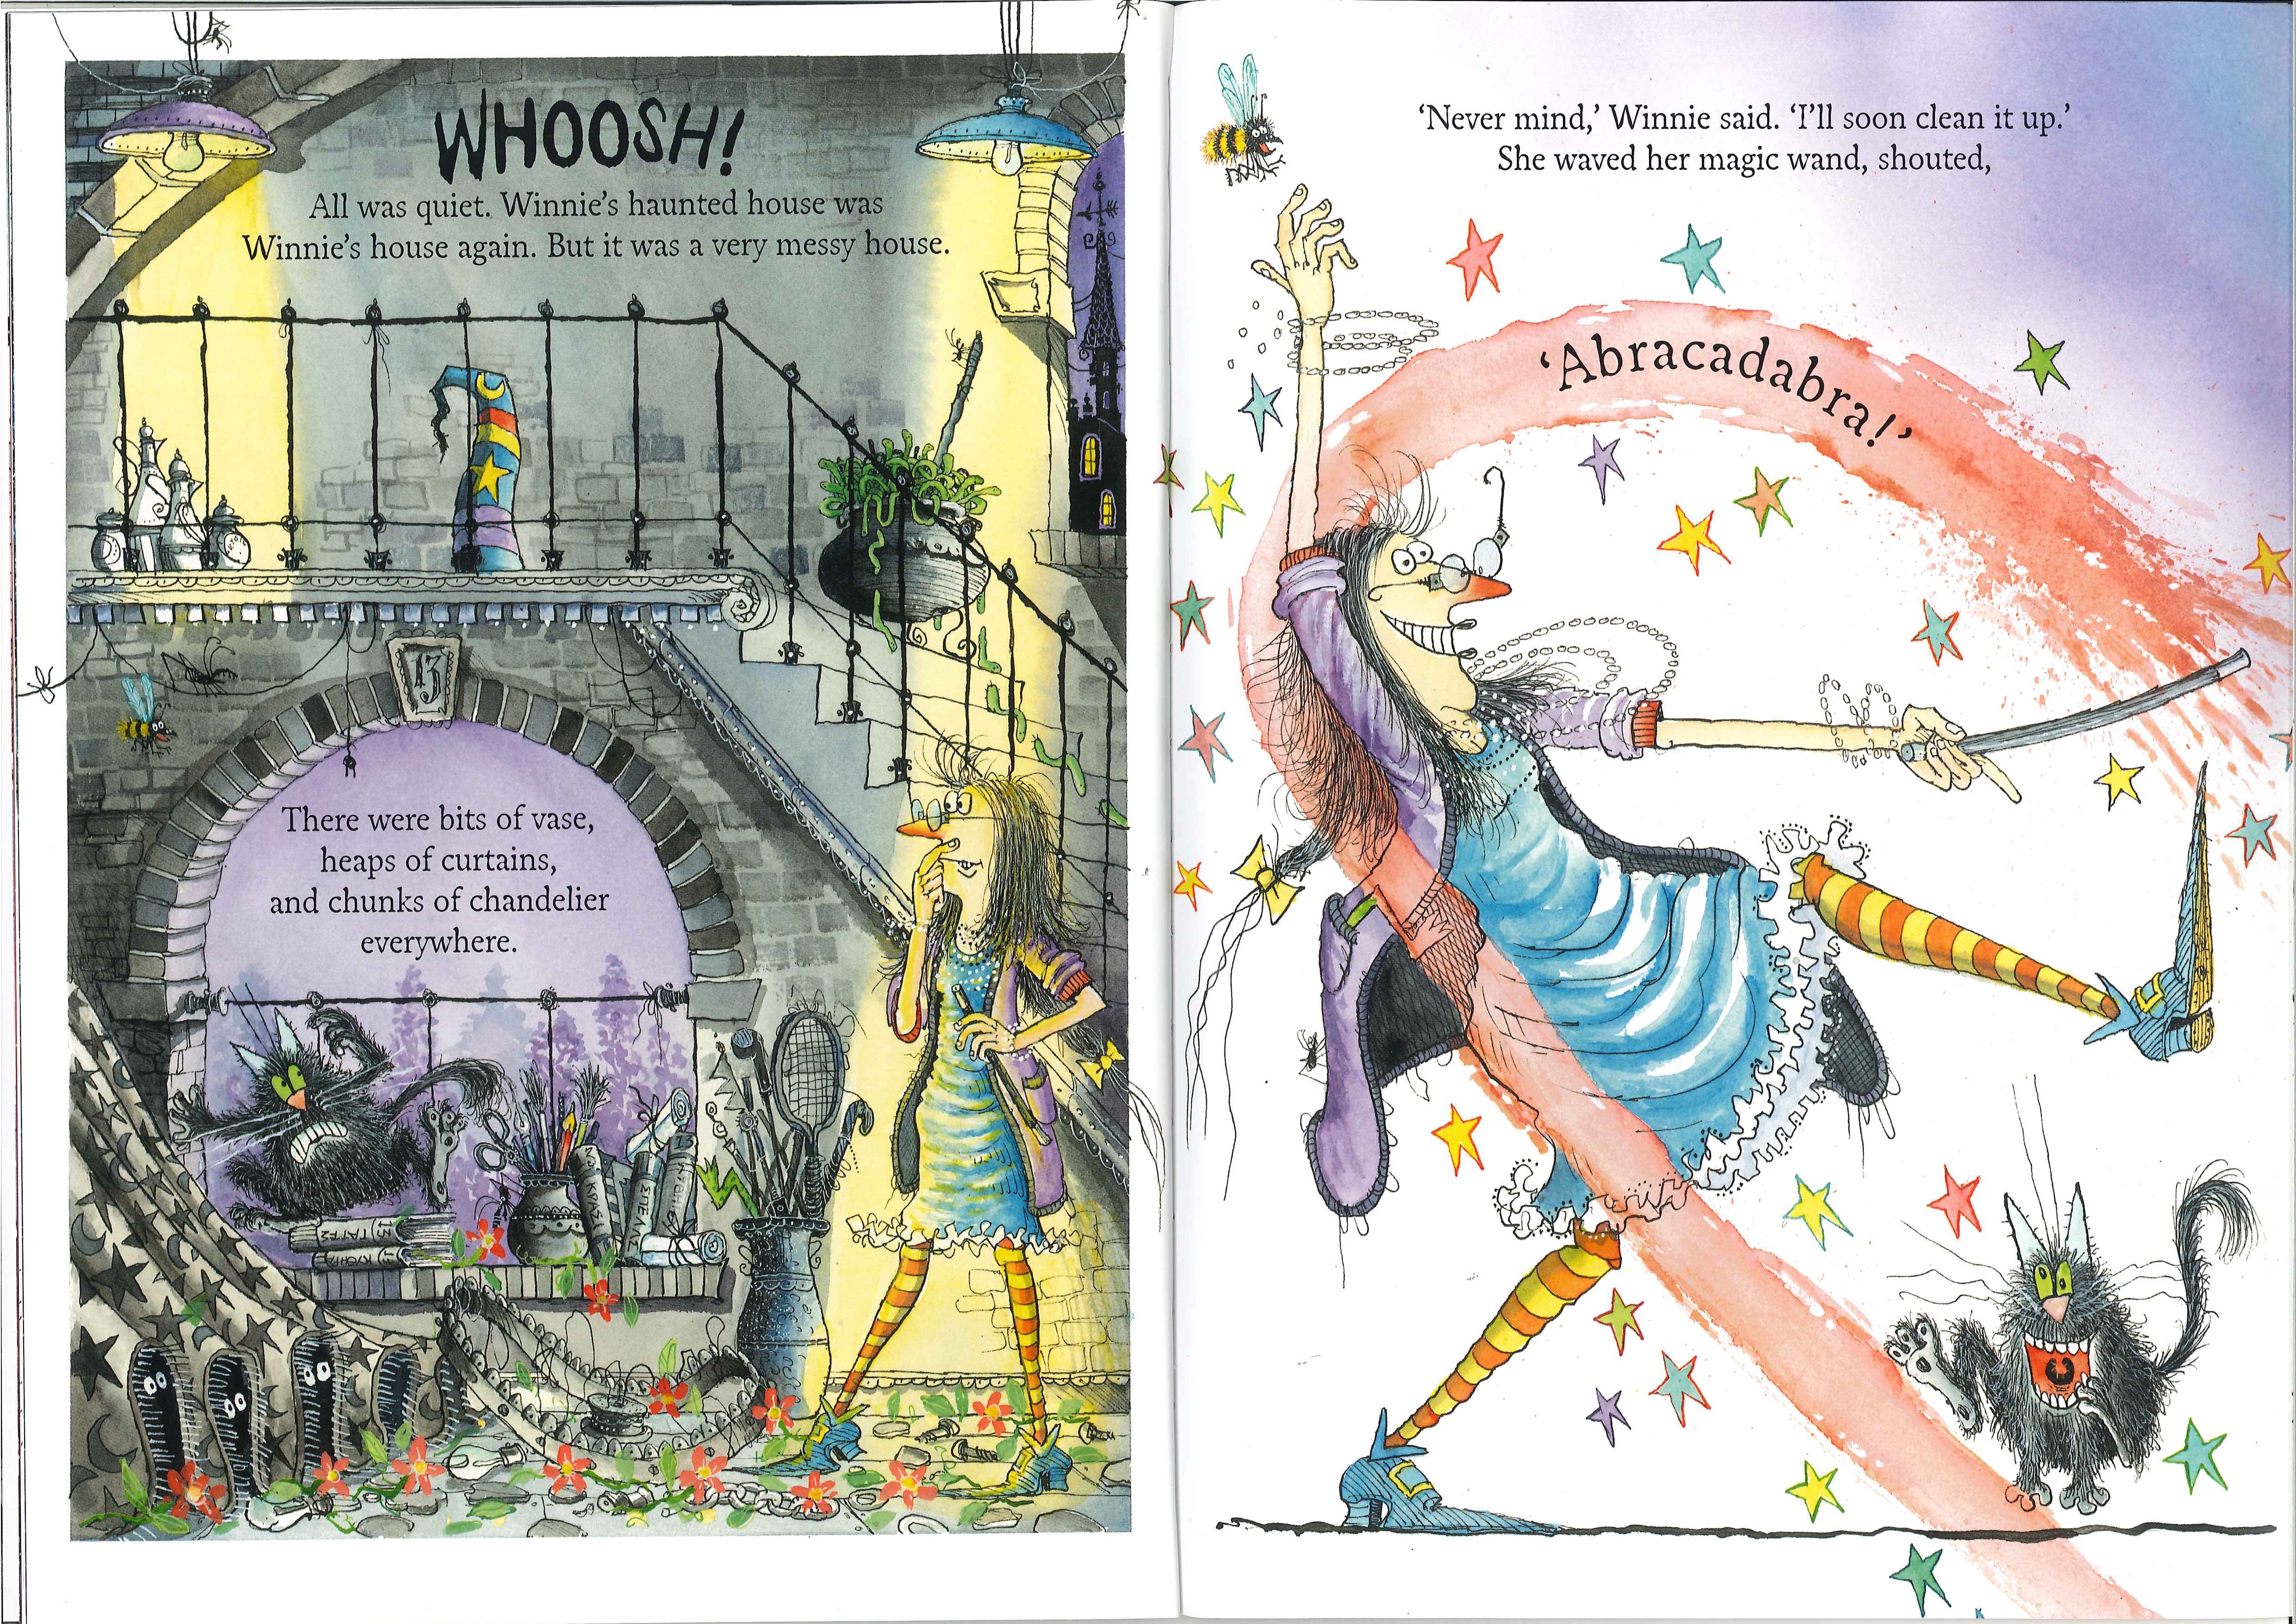 Winnie and Wilbur: The Haunted House with audio CD